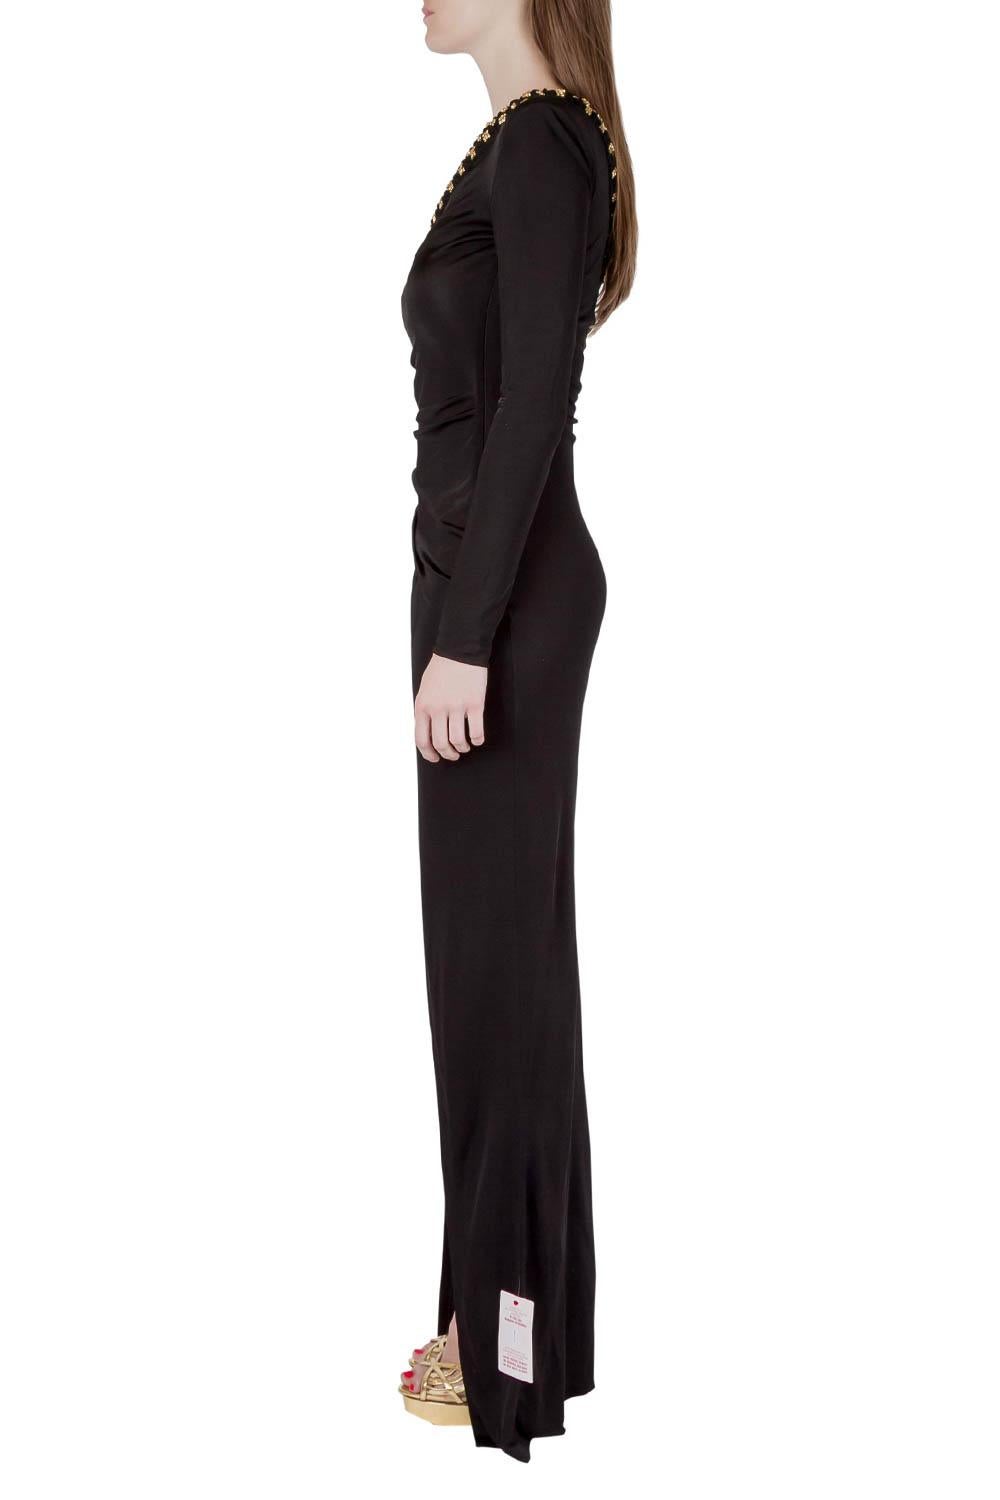 You are sure to feel glamorous in this gown by Balmain. The stretch knit gown brings a one-shoulder style with a long sleeve and crystal embellishments. It is also draped in such a way that a wide slit is formed on the front, thus allowing your